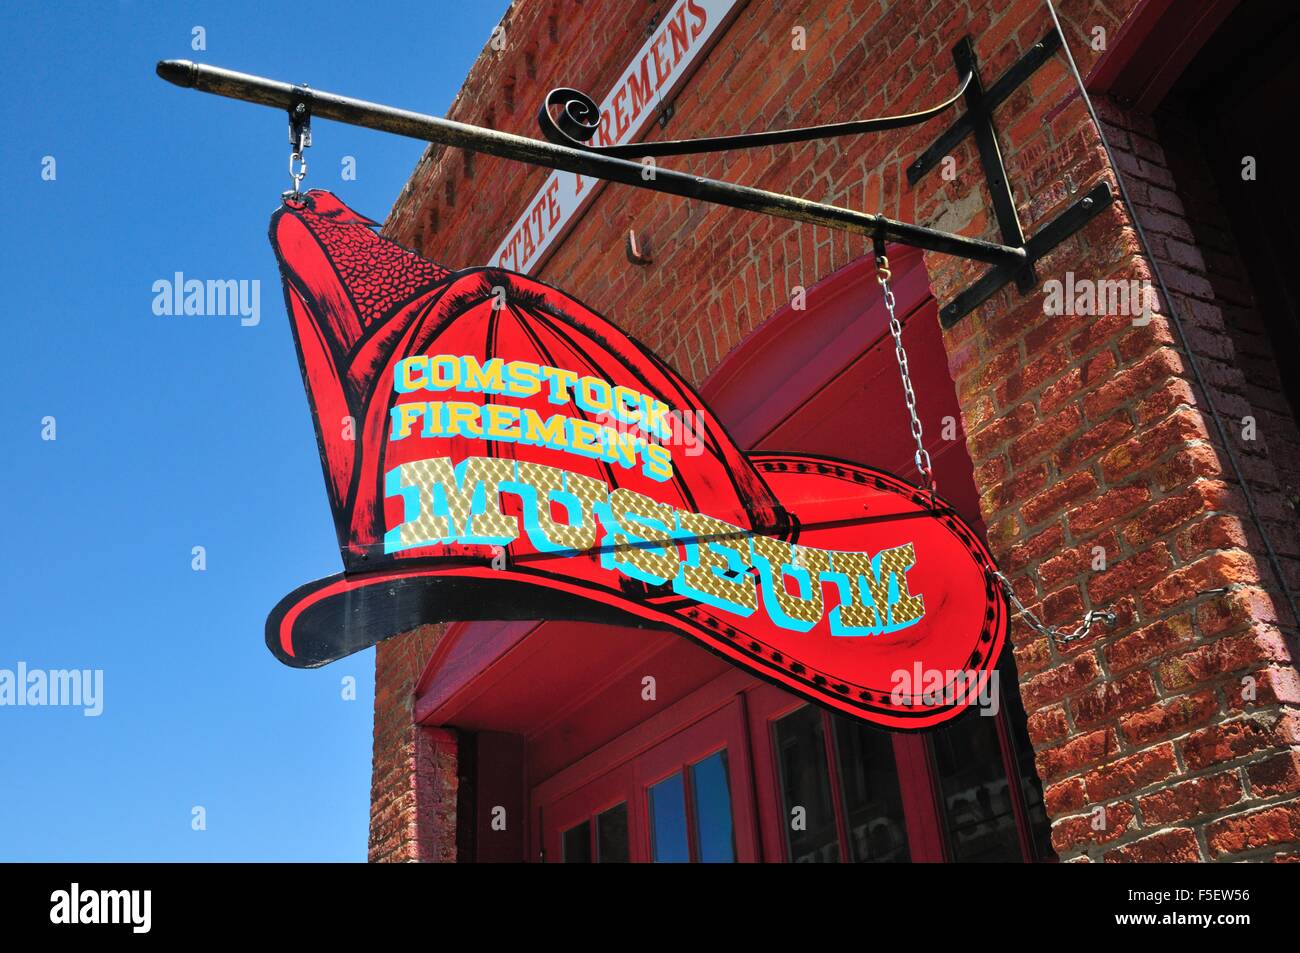 Sign in the shape of a fireman's hat announcing the Comstock Firemen's Museum in Virginia City, Nevada Stock Photo